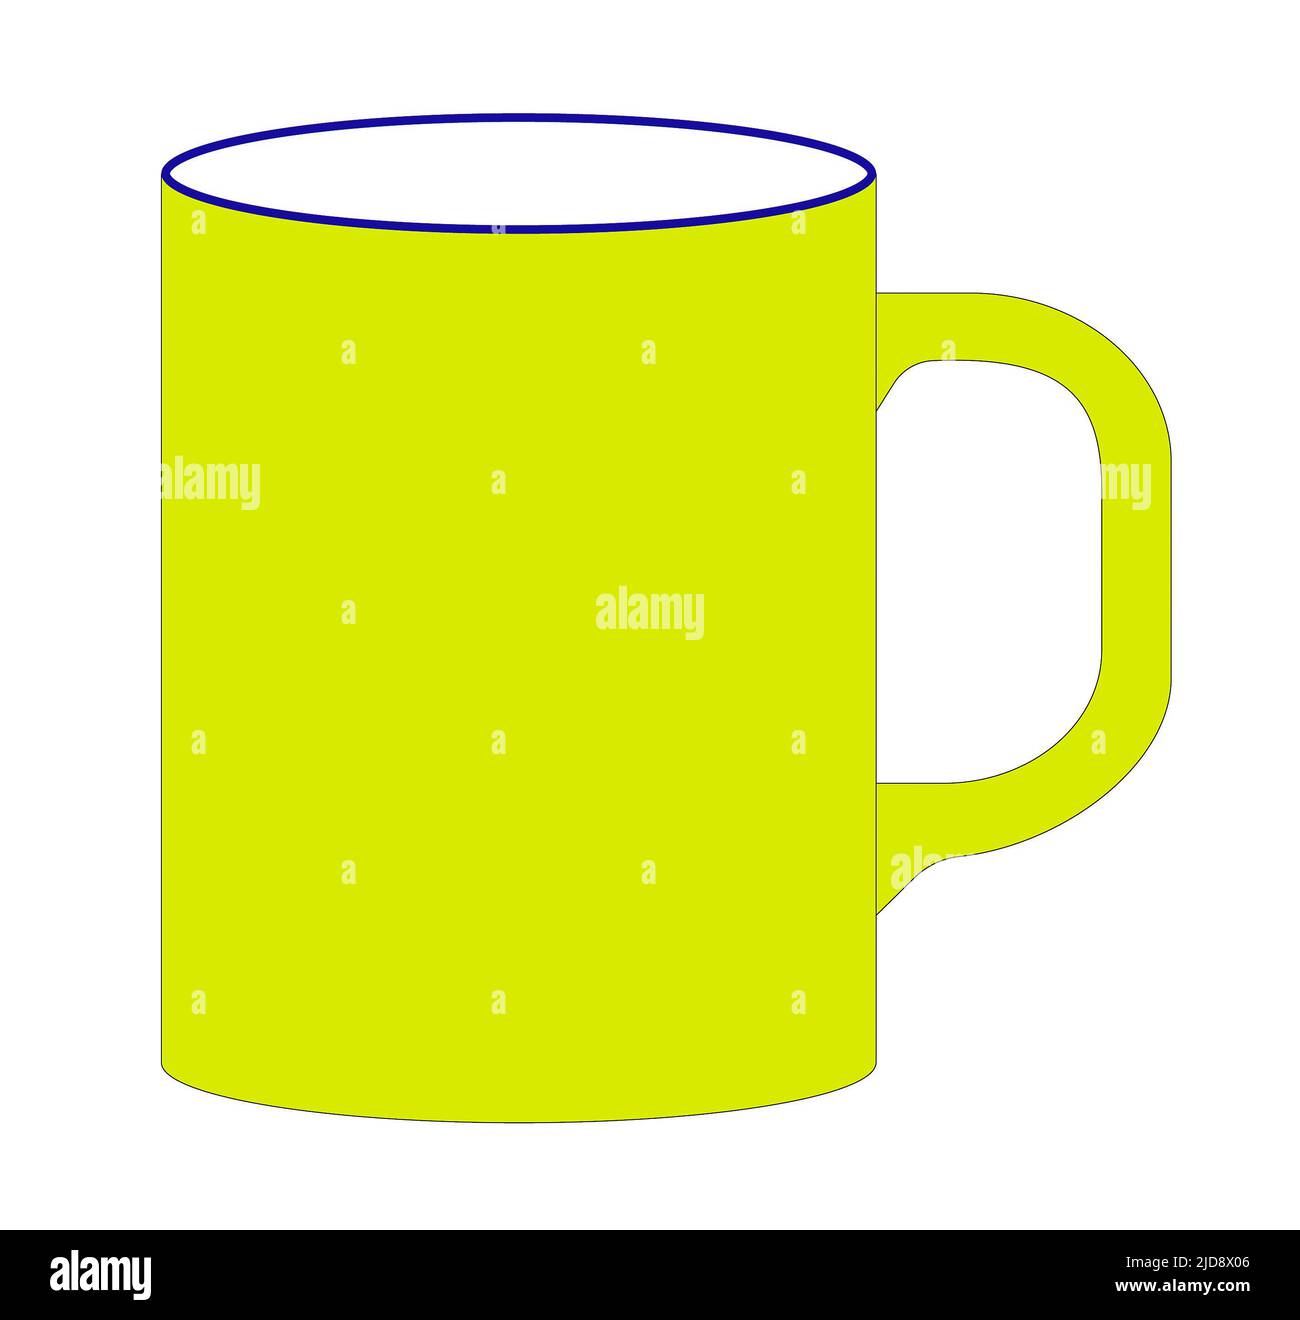 A graphic illustration of A Plain Yellow Mug for use as an icon, logo or web decoration Stock Photo